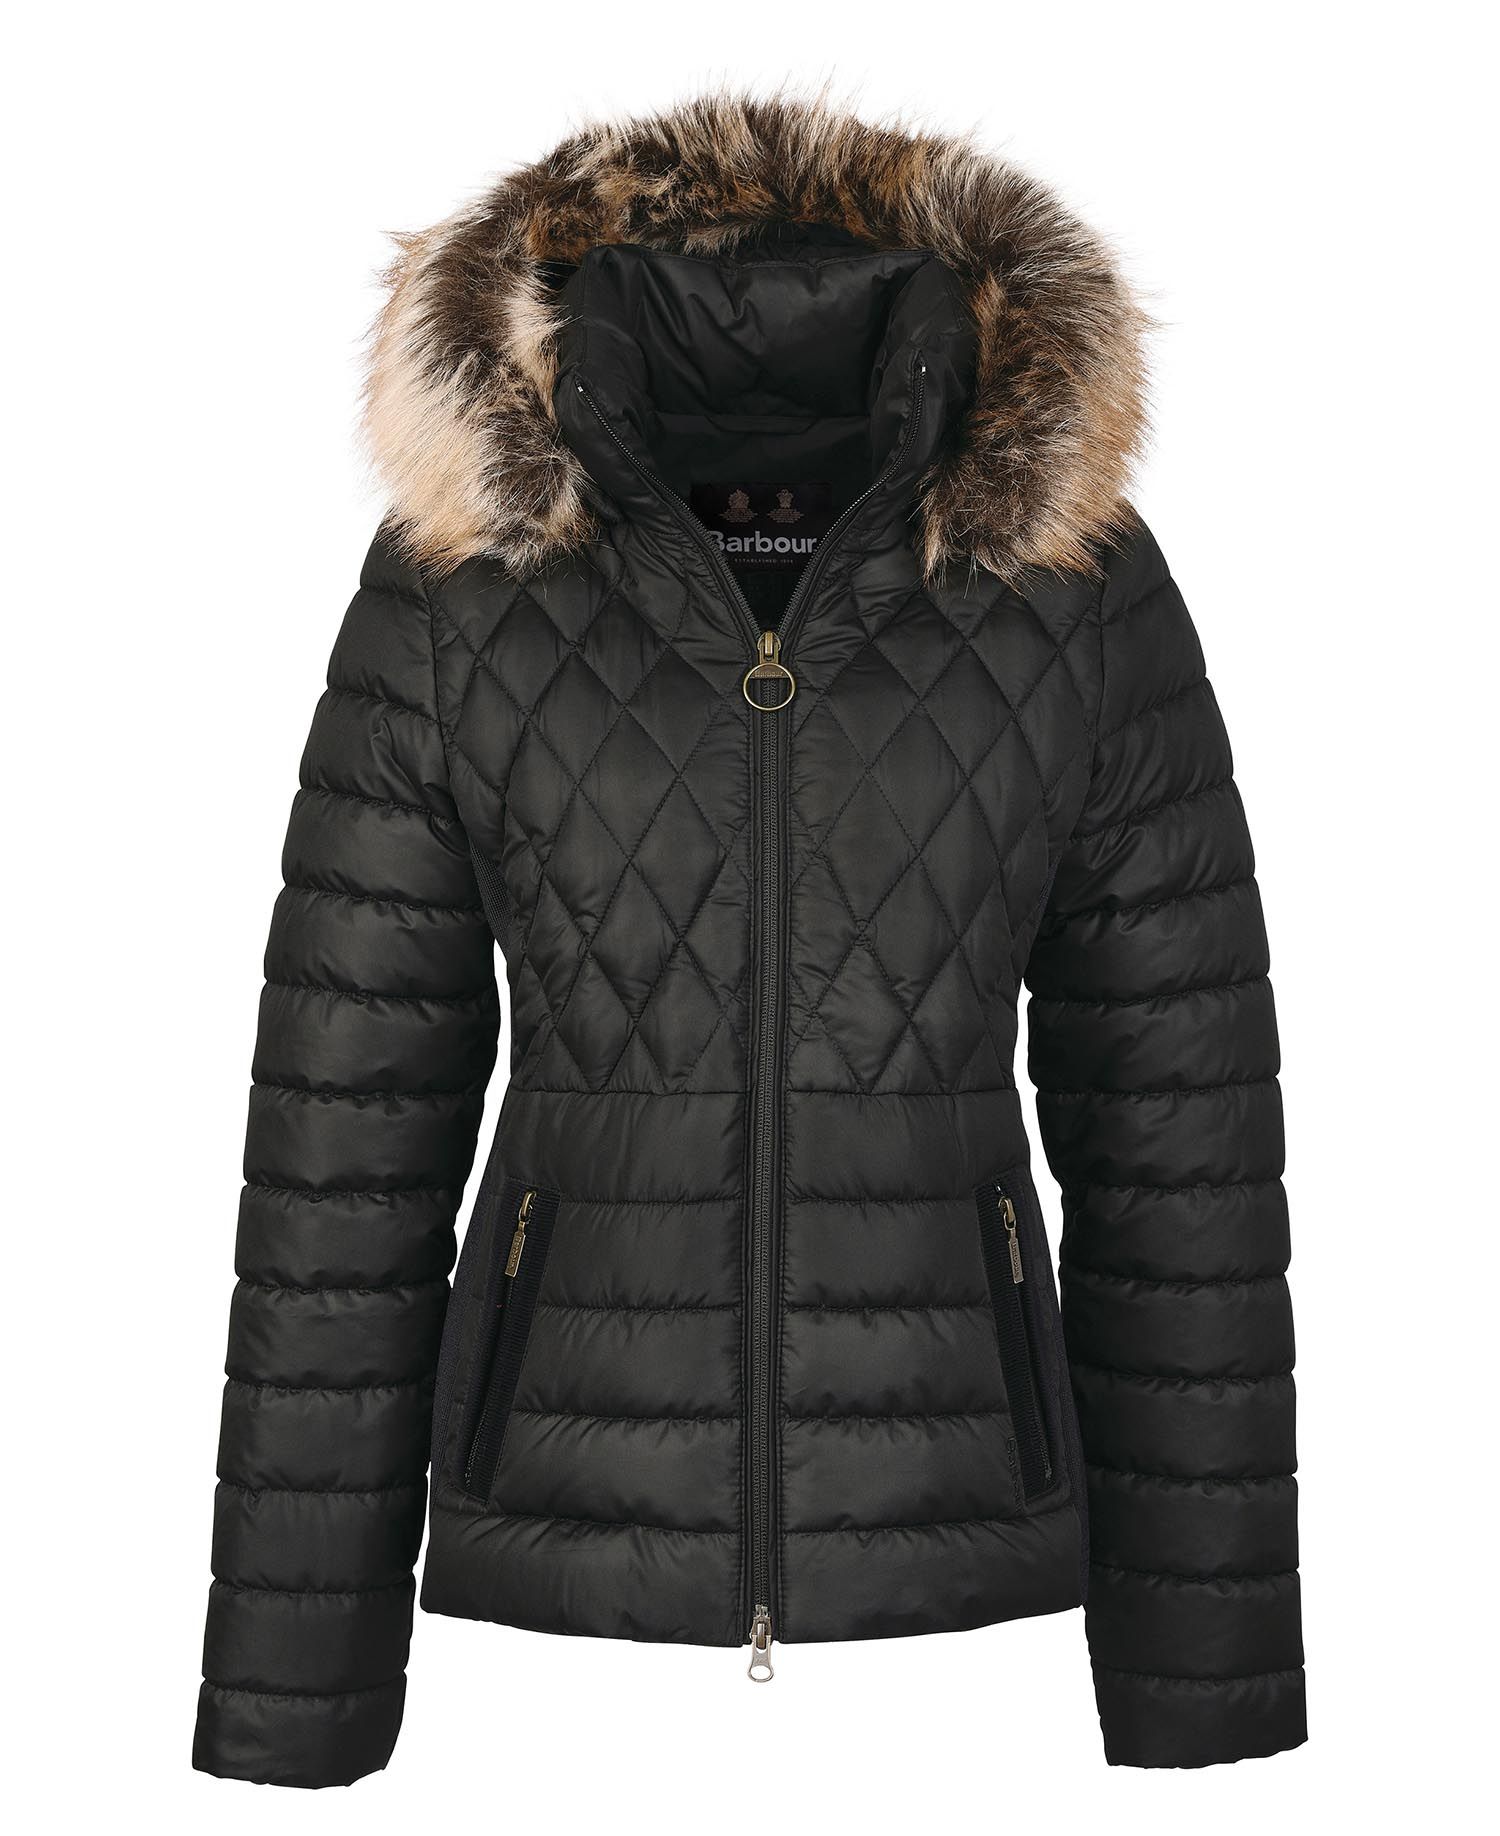 Mallow Quilted Jacket - Black